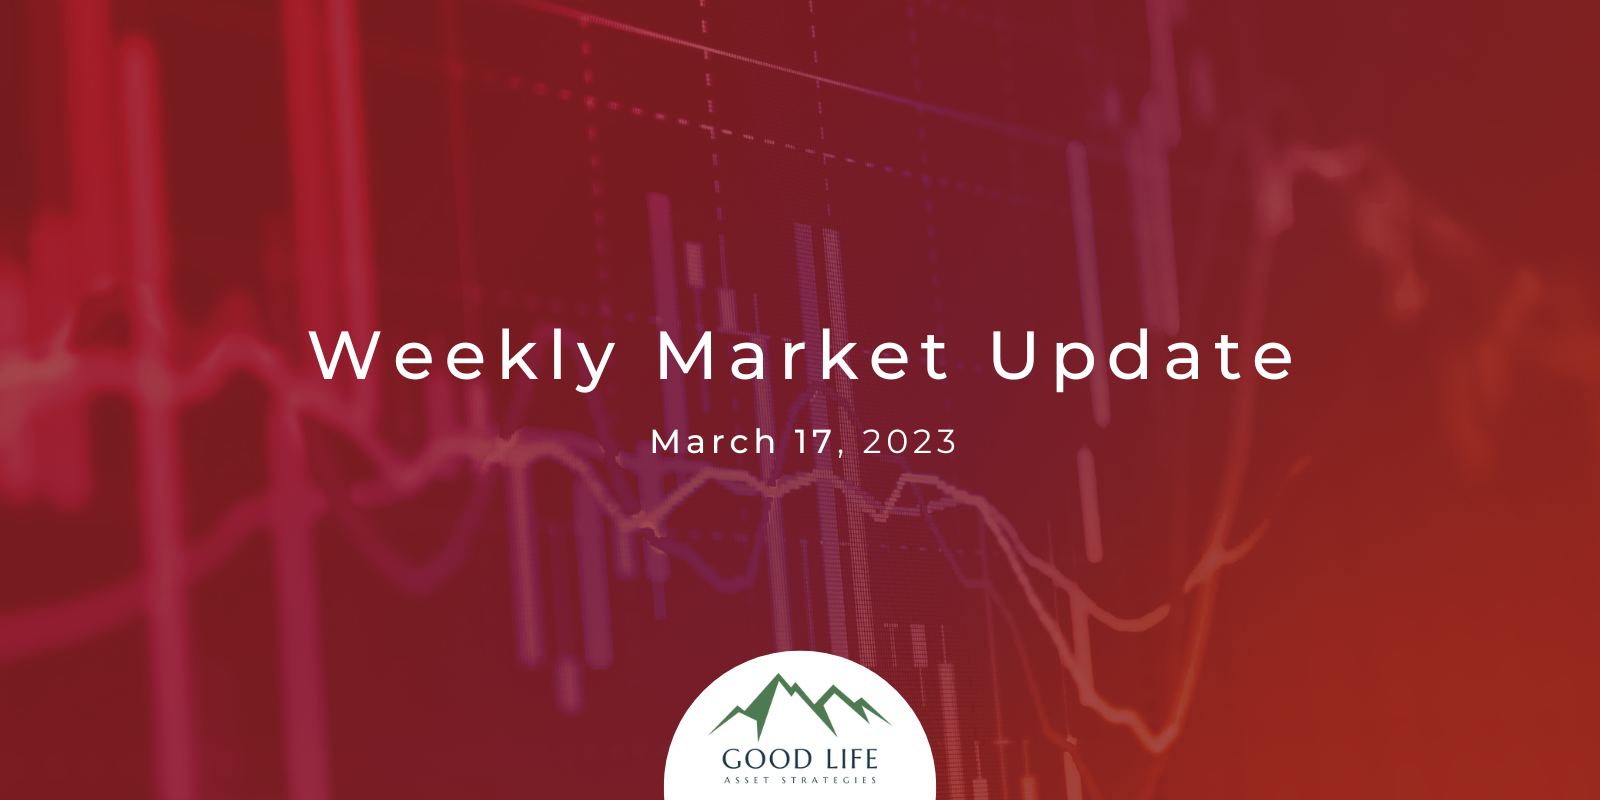 Is this just an oversold bounce? Learn how this may be the case, but recovering from downward trends will still take time by reading DeWayne Hall’s Weekly Market Update for March 17, 2023.